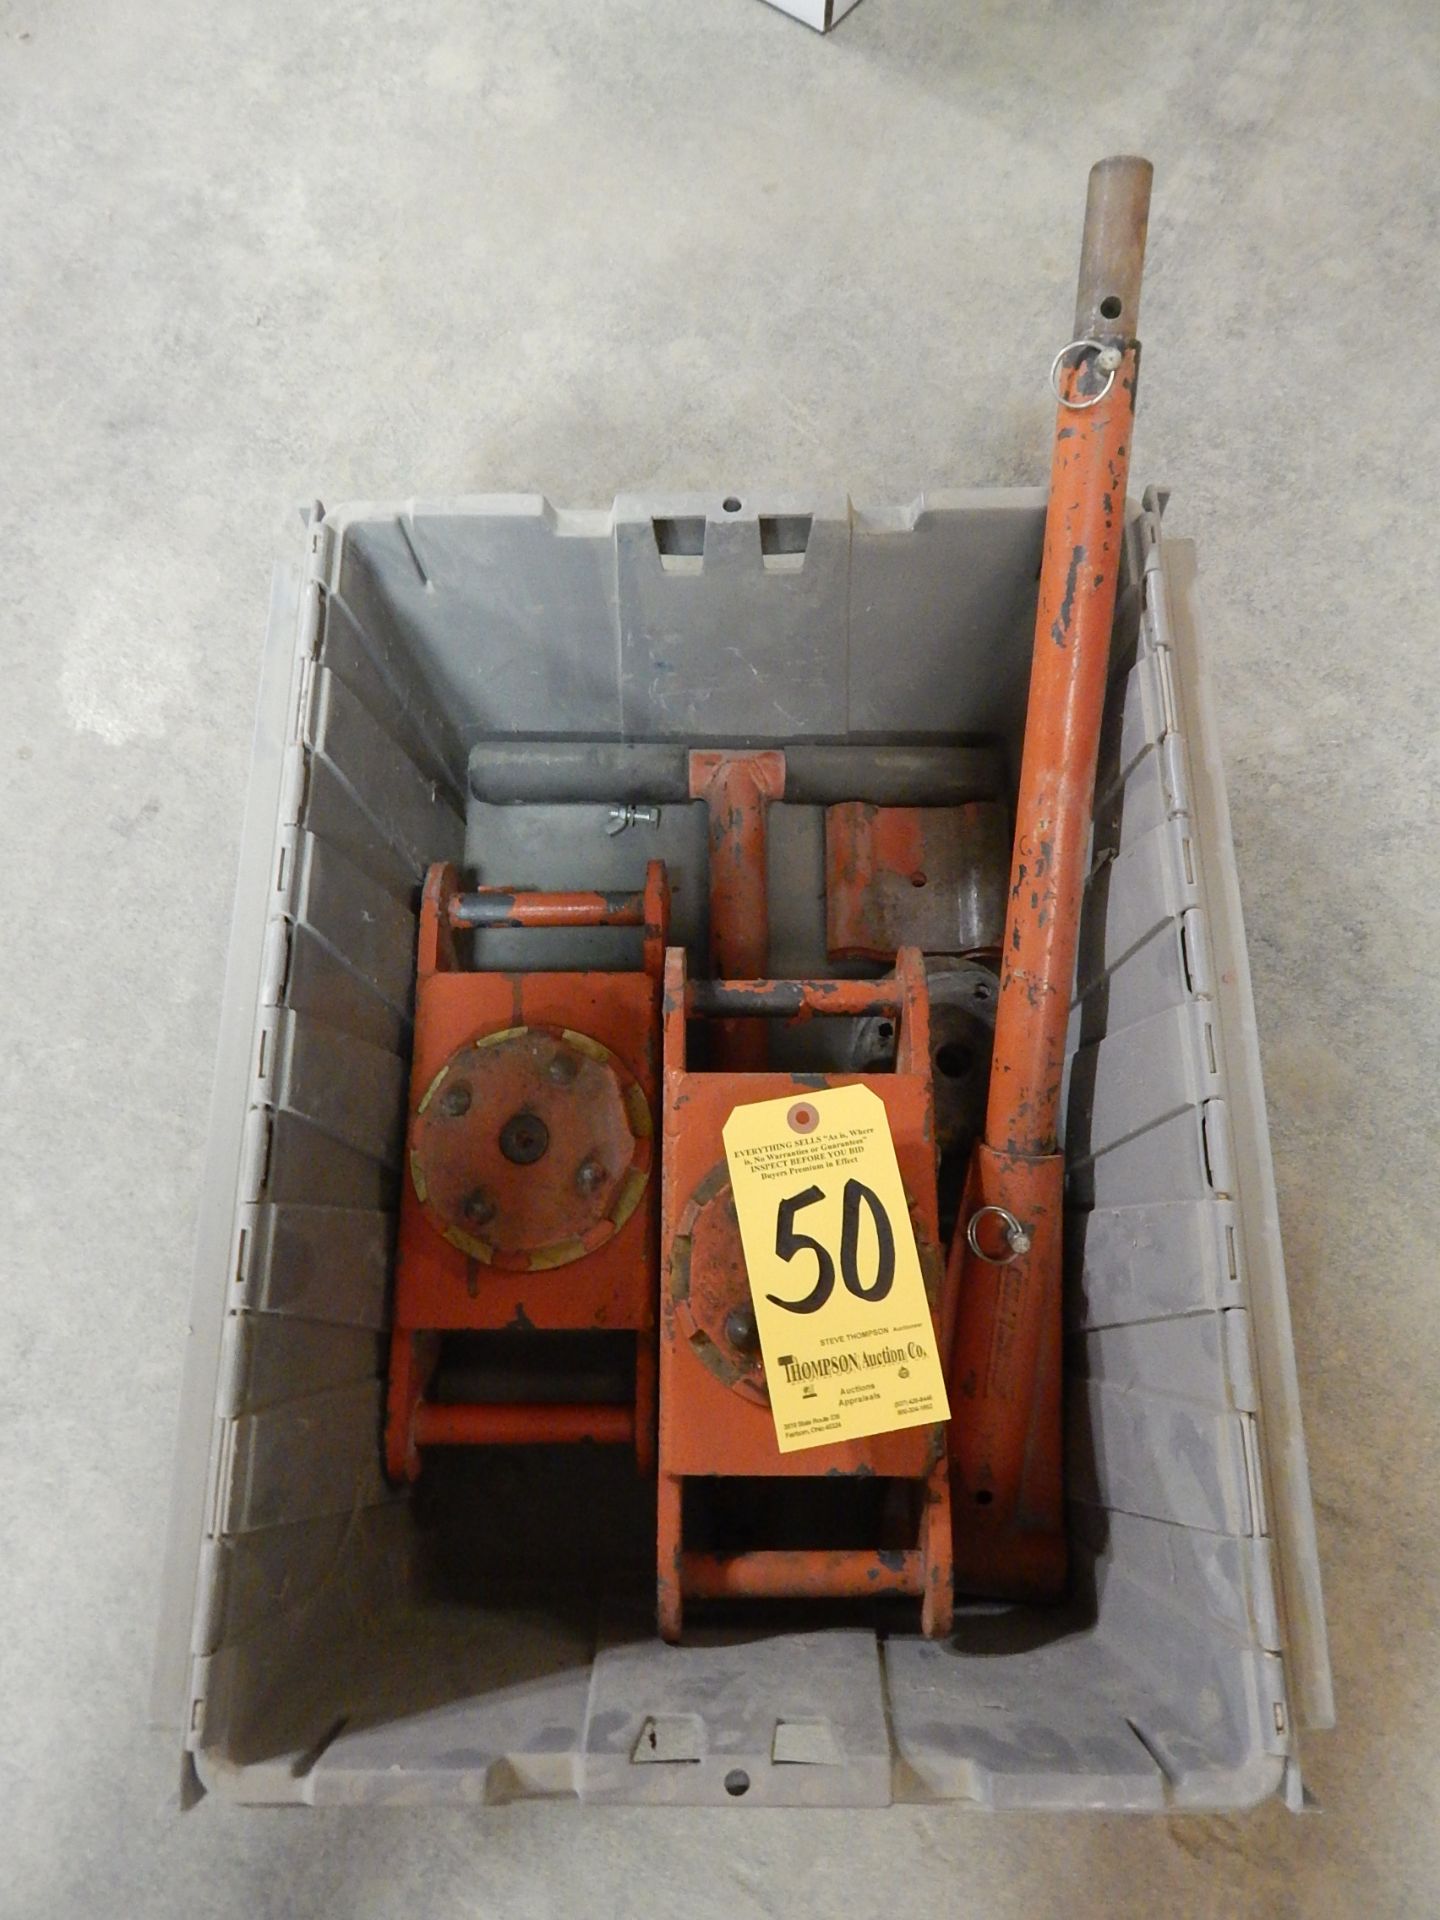 (2) Multi-Ton Machinery Skates with Steering Handle